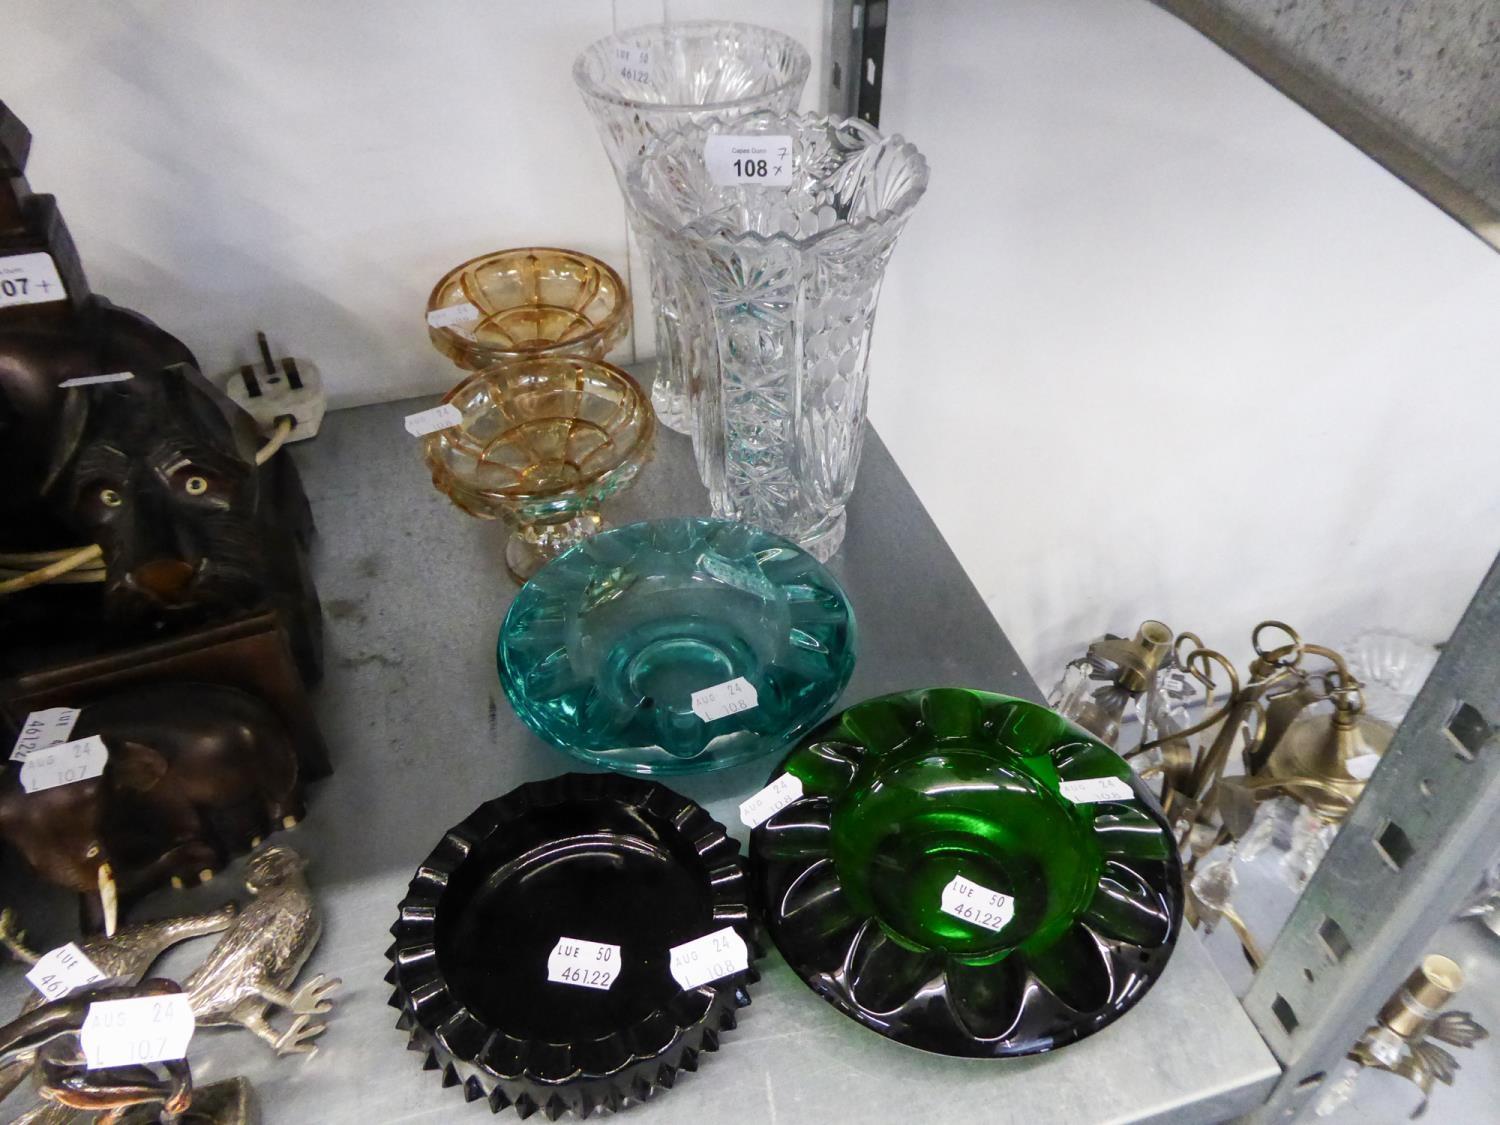 A CUT GLASS FLOWER VASE; A MOULDED GLASS FLOWER VASE; THREE HEAVY COLOURED GLASS ASHTRAYS AND A PAIR